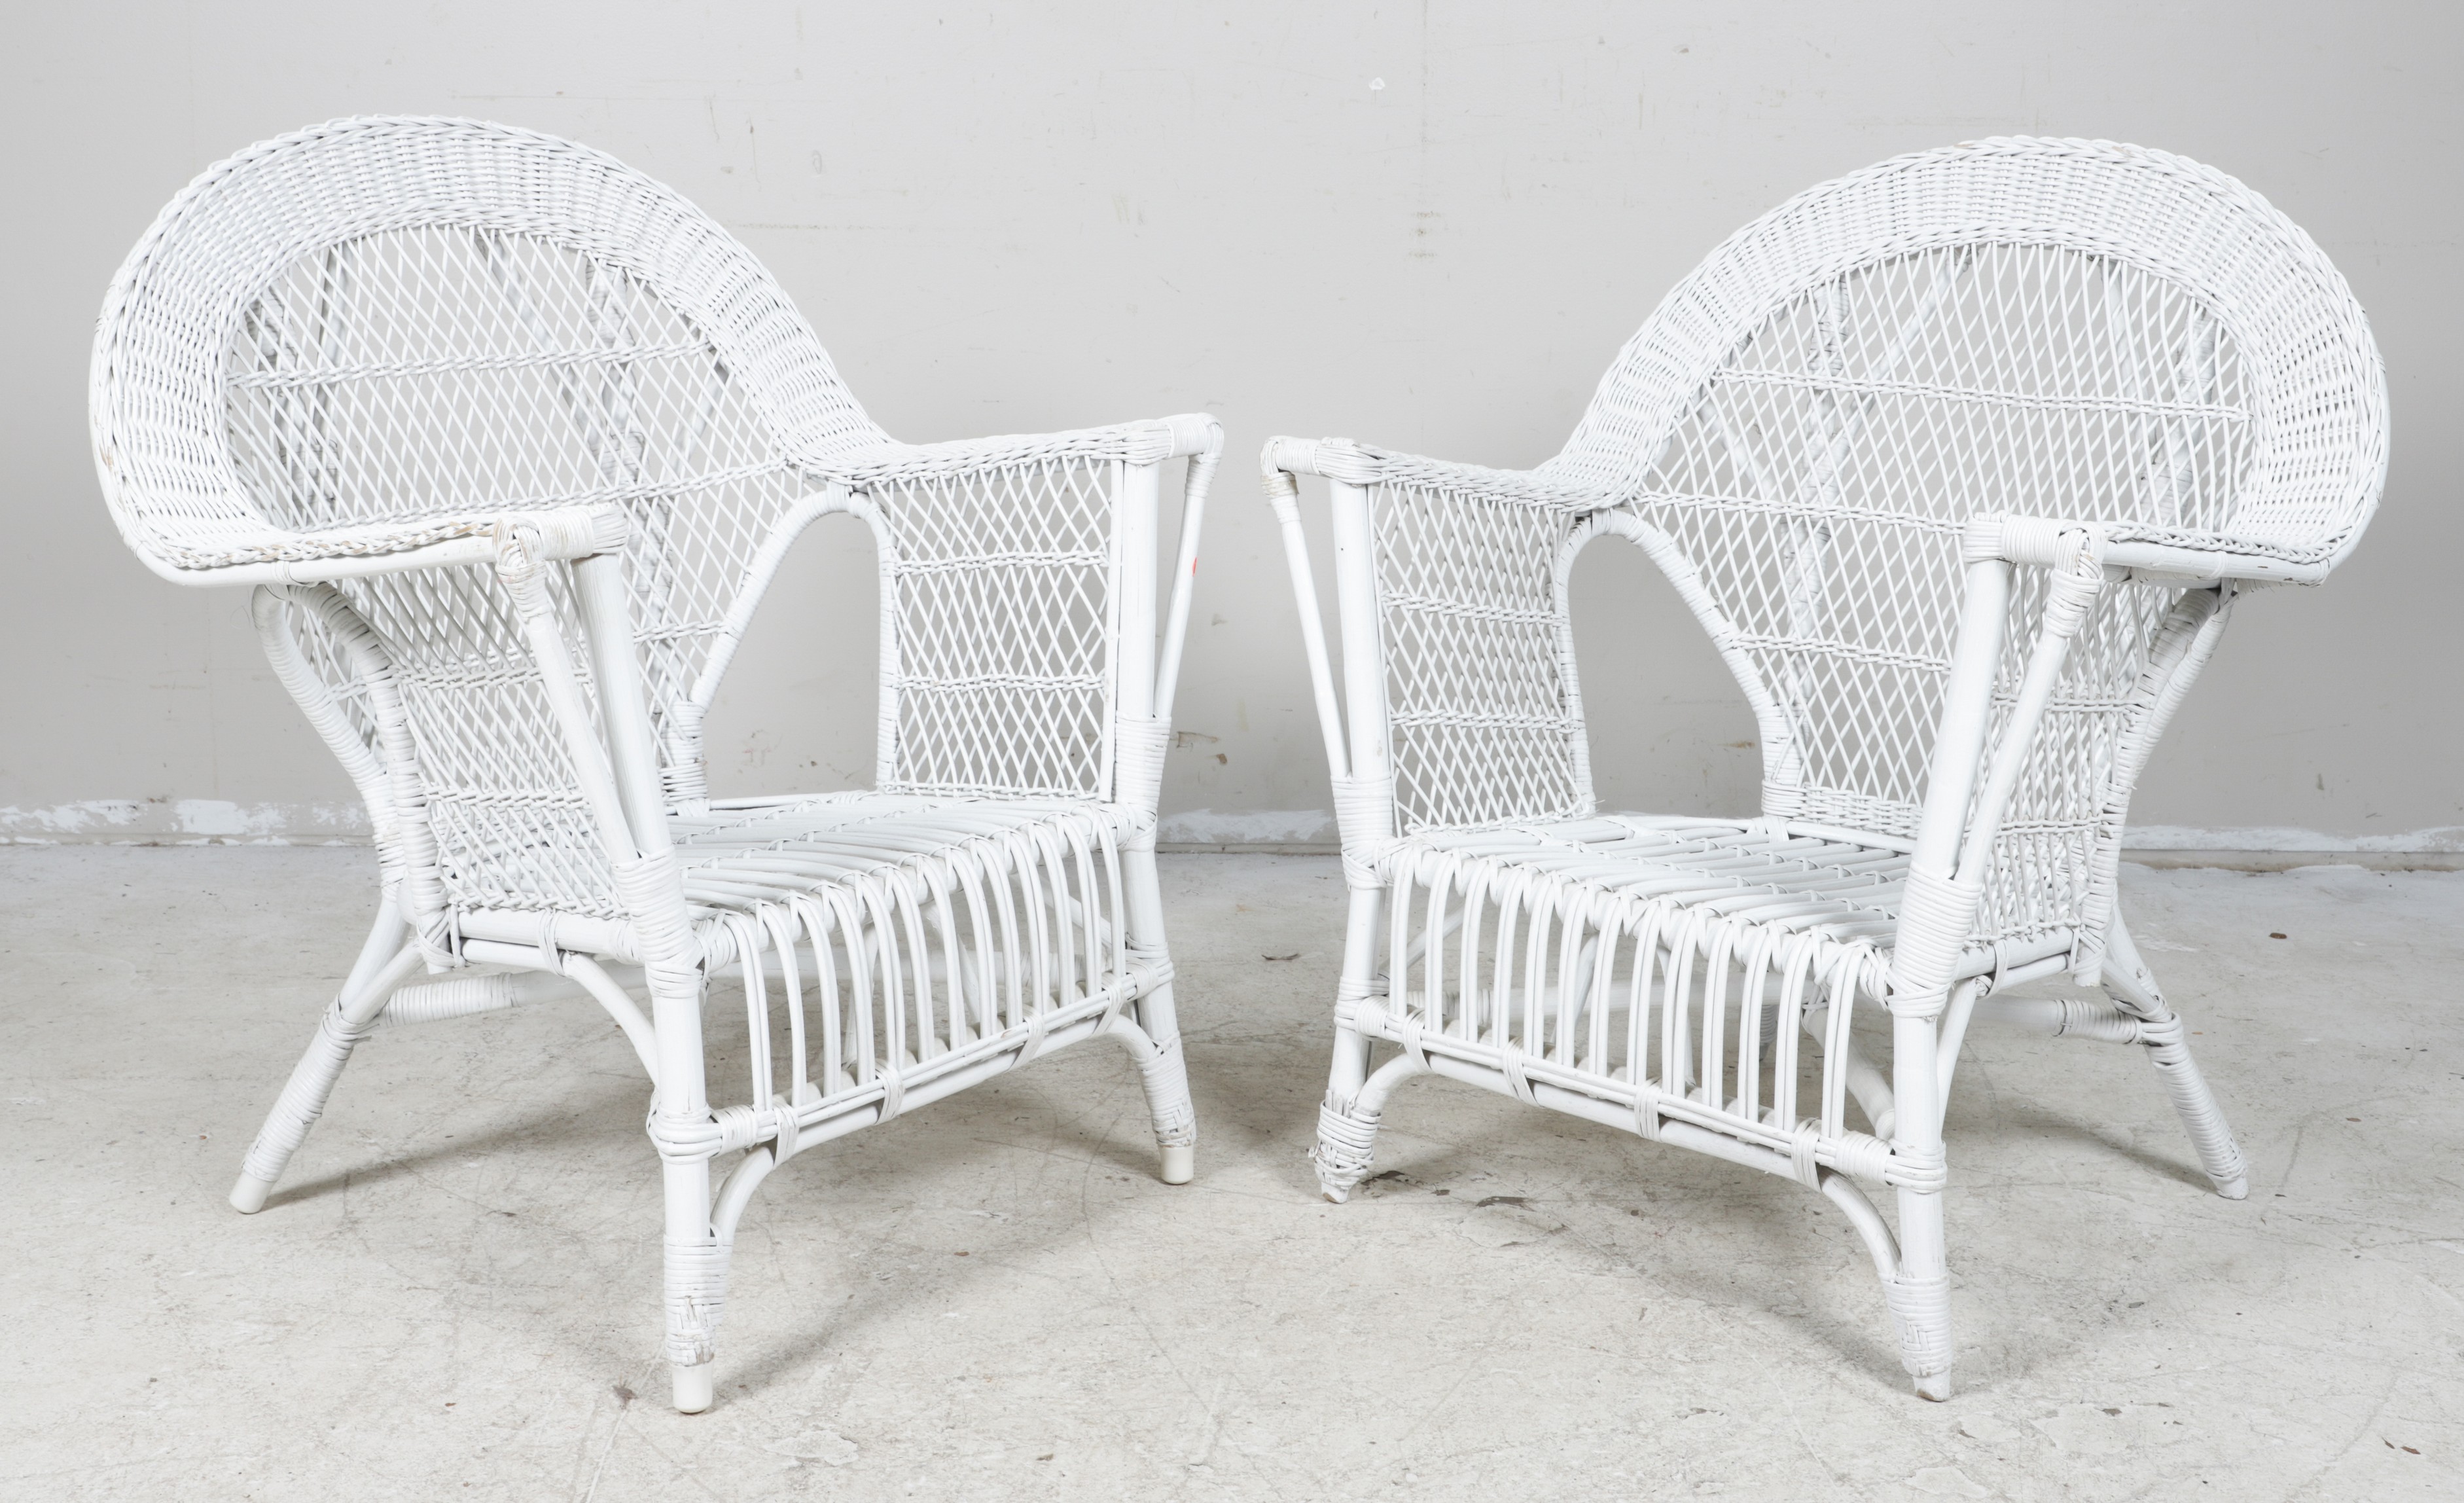  2 Wicker armchairs white painted  30fe71